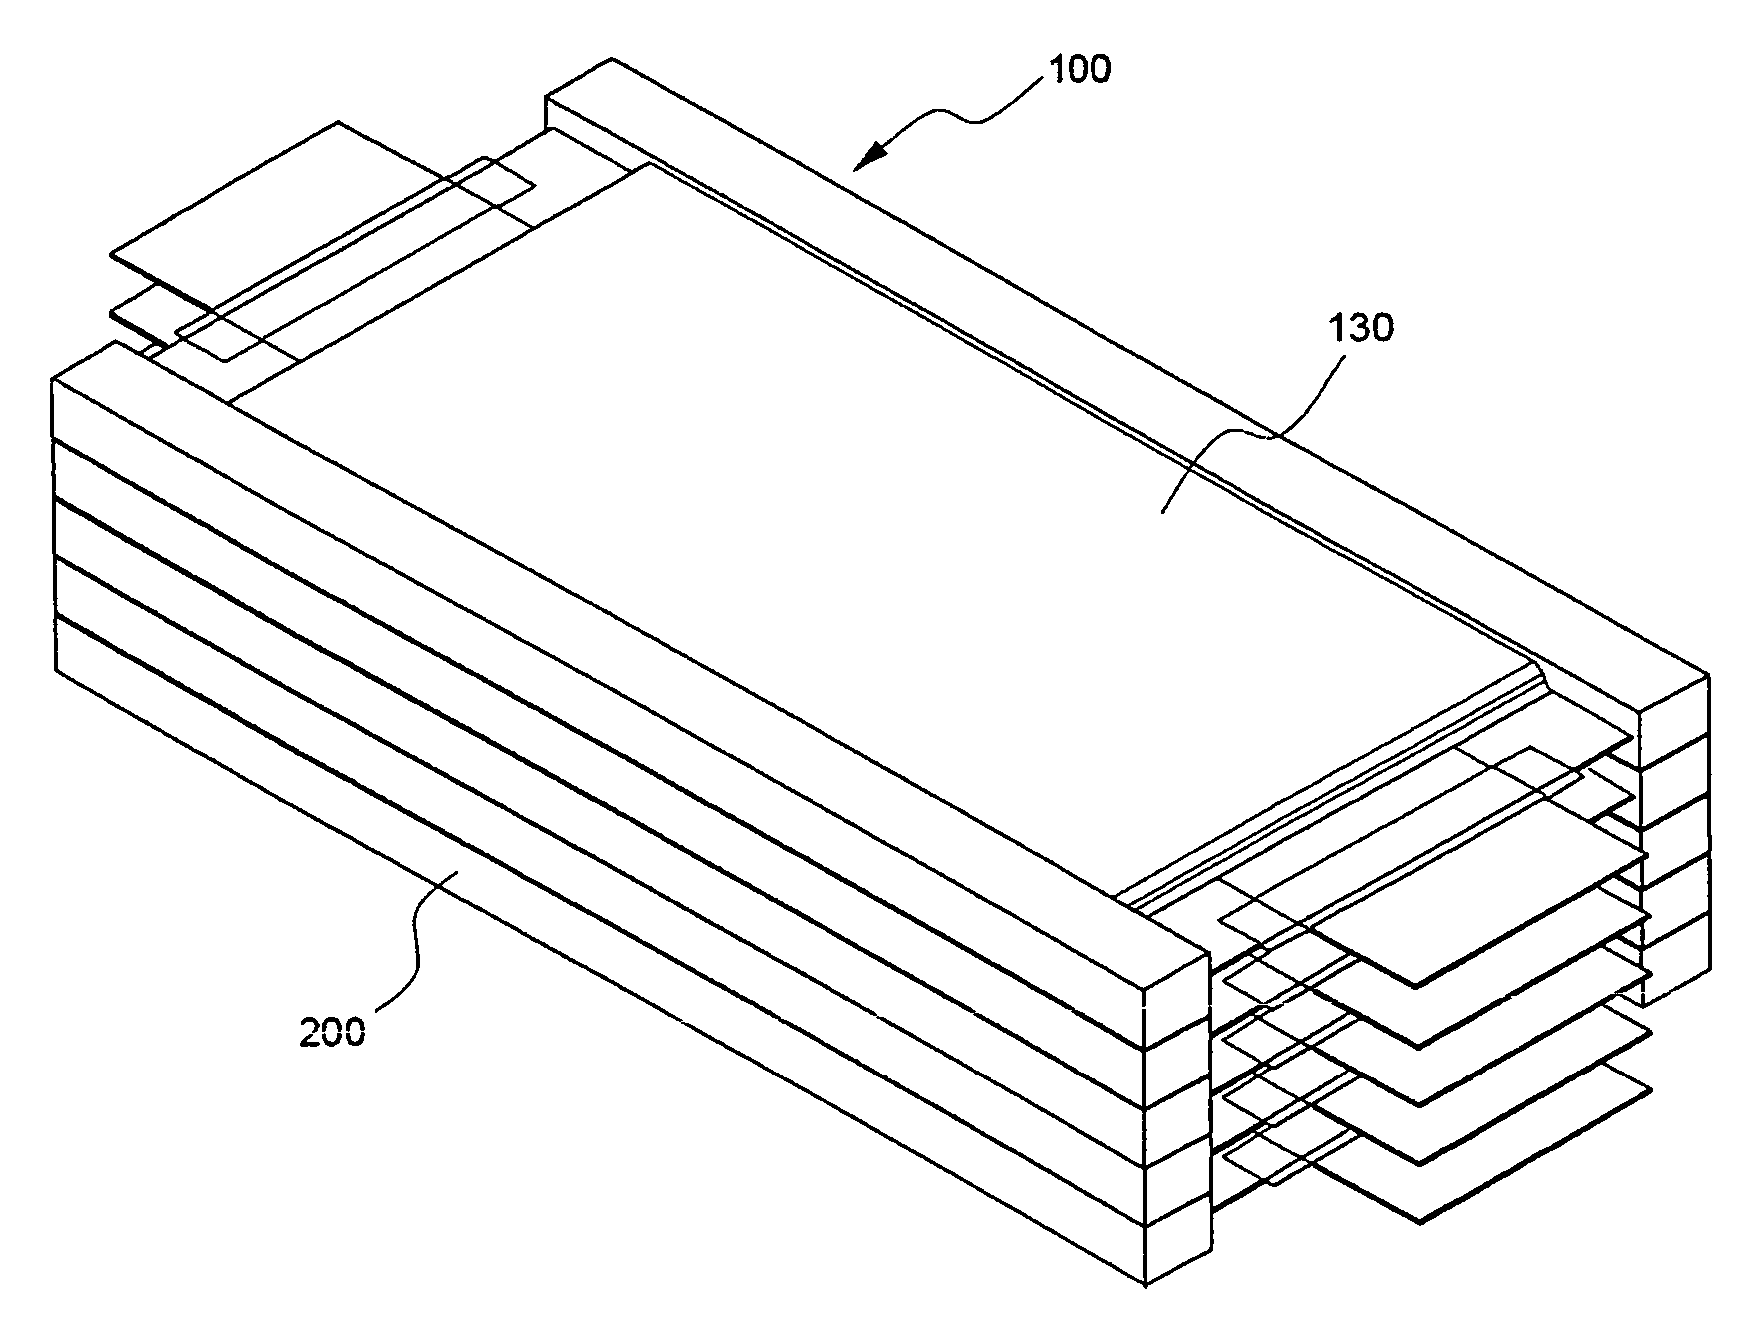 Secondary battery of novel structure and battery pack having the same